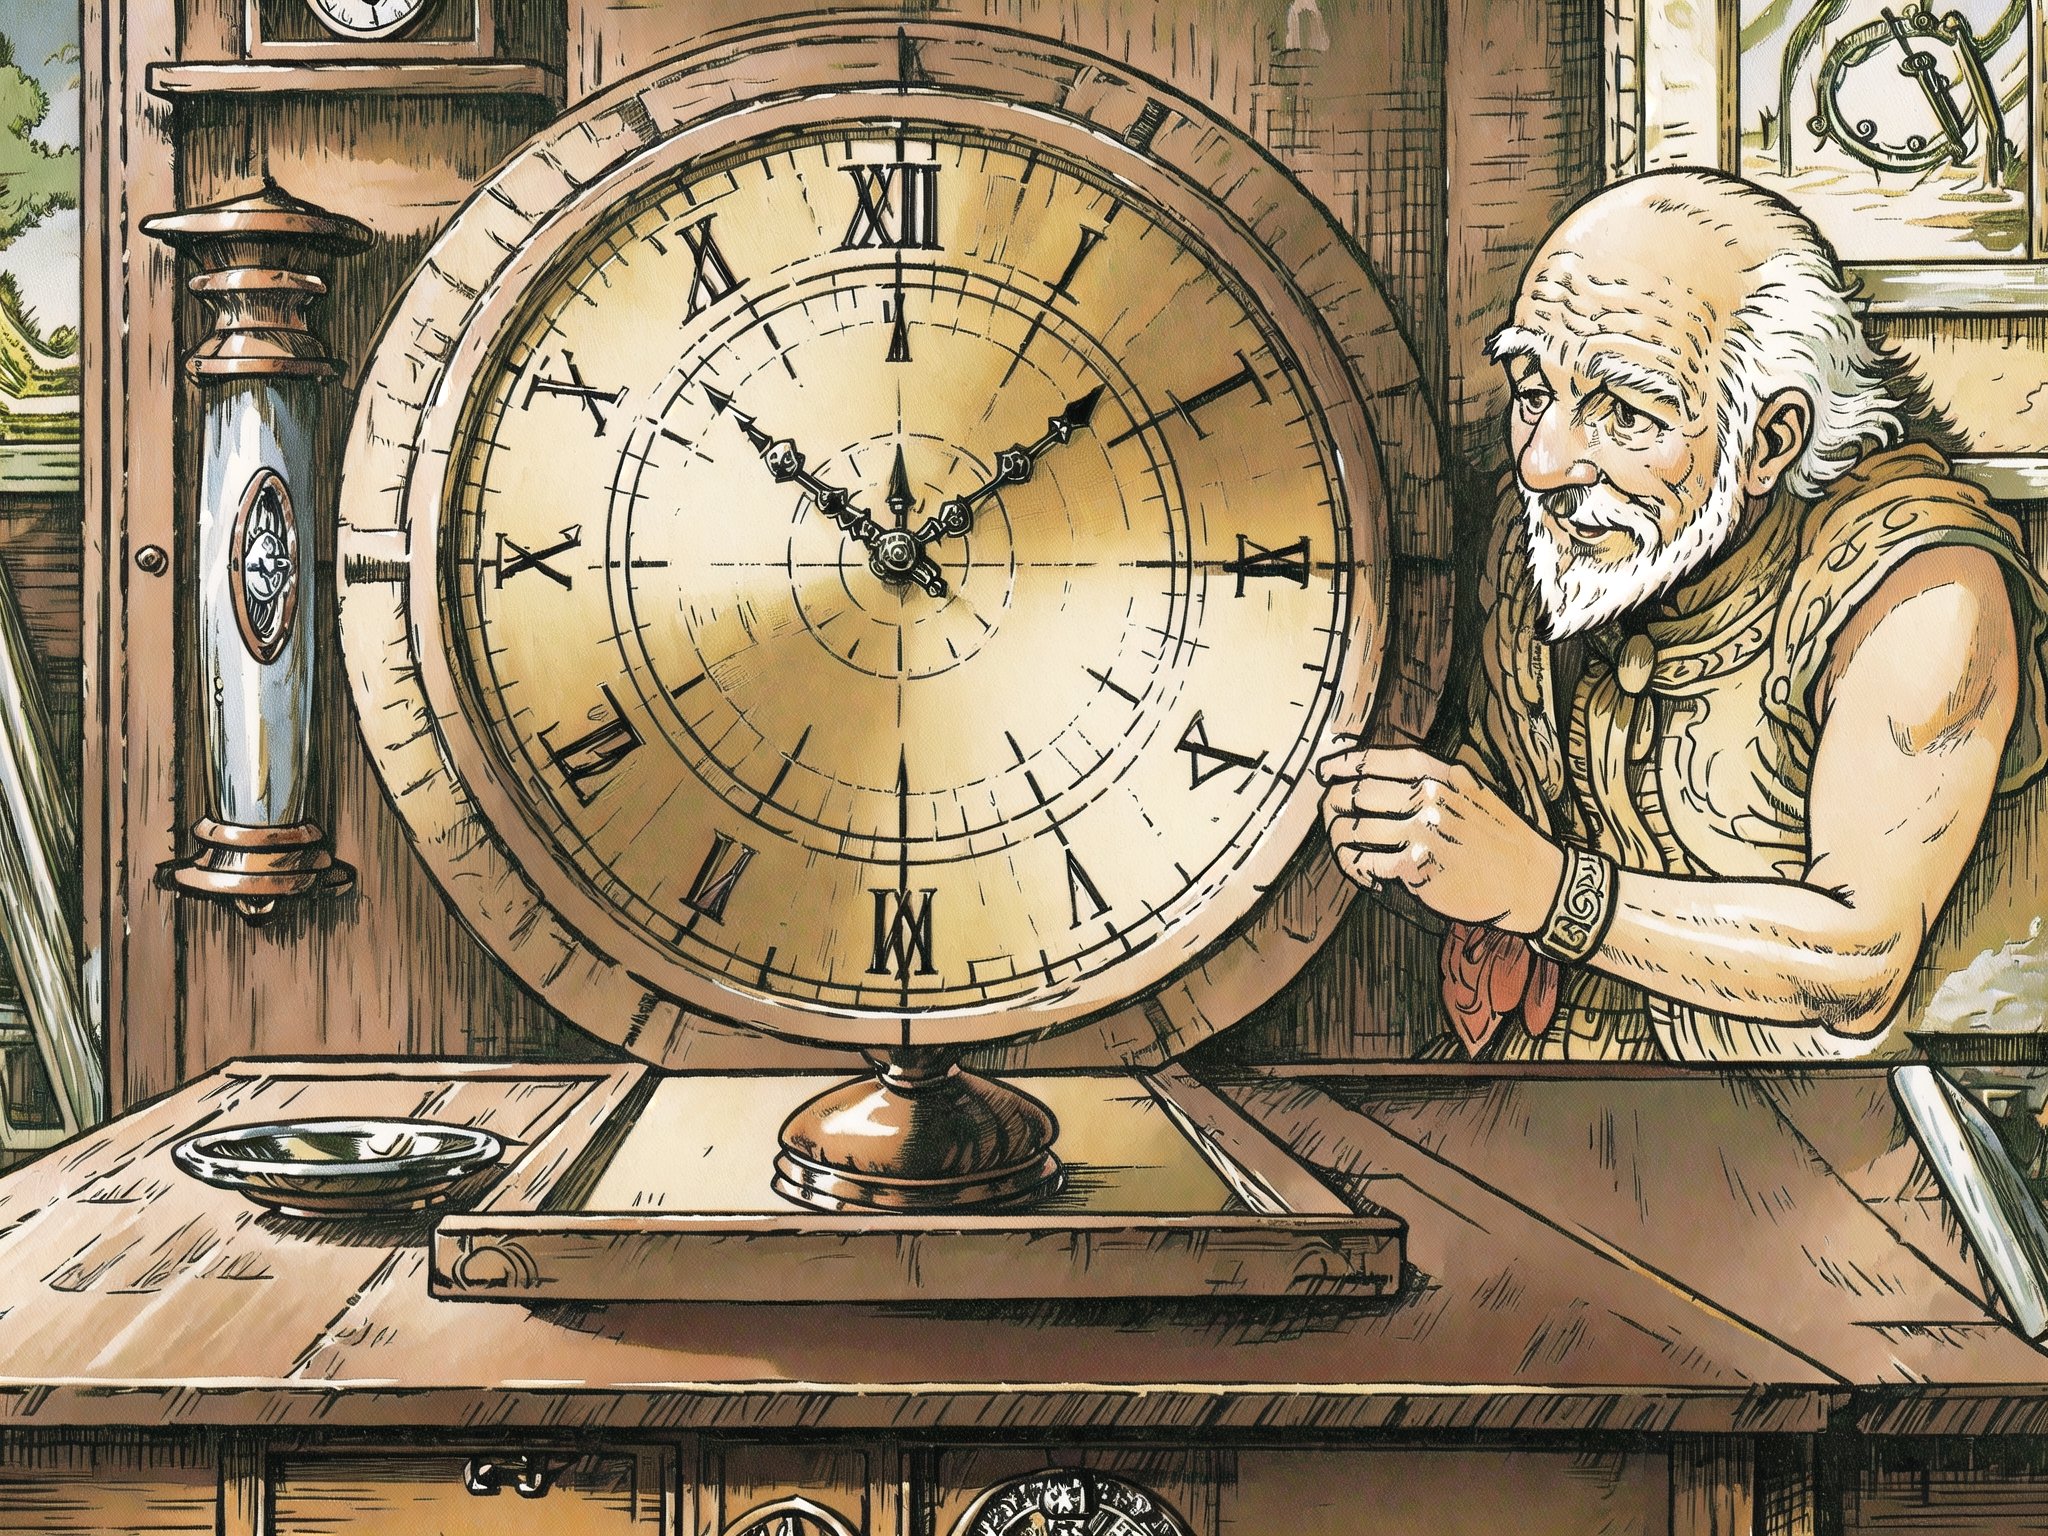 (masterpiece, best quality:1.3), 8k resolution, digital illustration, rup3rt_Style, (solo:1.2), old man, old, balding, beard, workshop, working, hands up, tunic, sleeveless, table, clock, indoors, painting (object), small details, extremely detailed background, finely detailed face, looking down, smile, weathered, warm tone, (fantasy illustration:1.3), intricate details